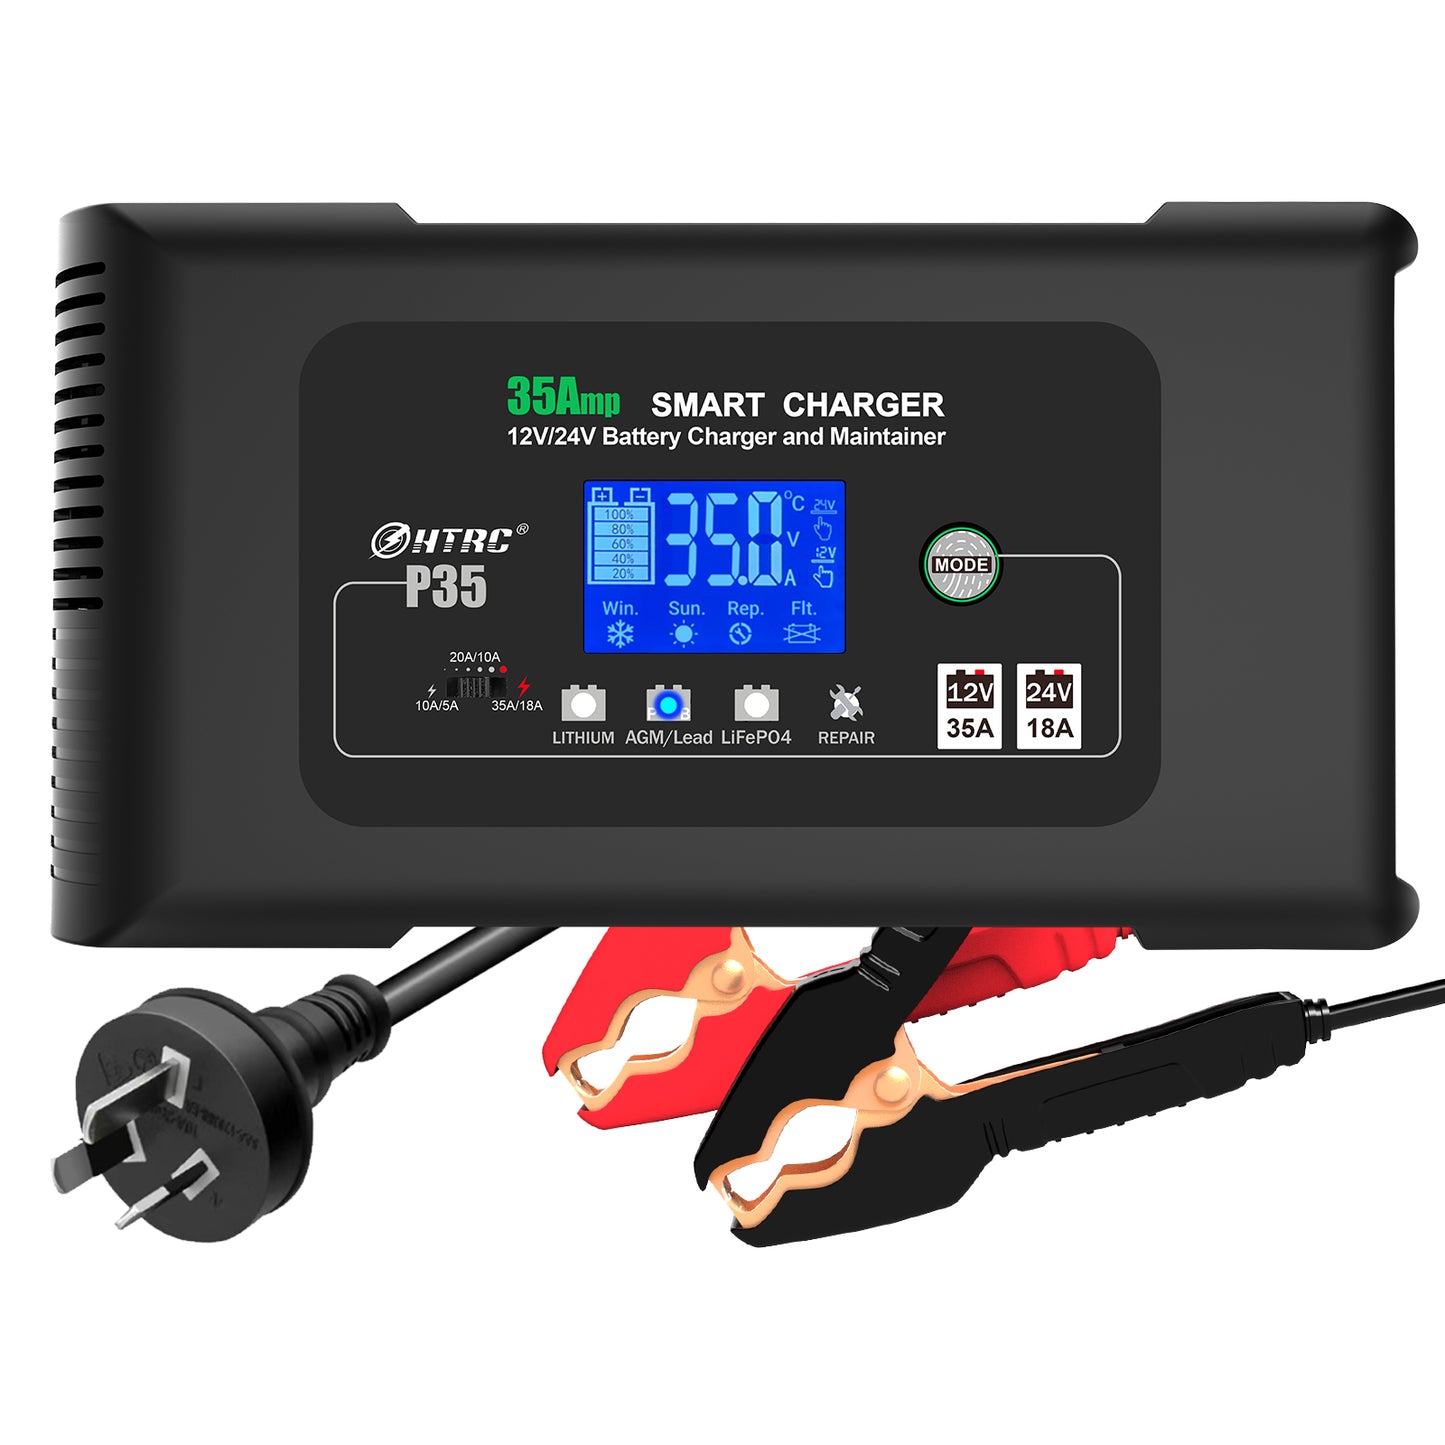 LiTime 12V 20A Lithium Battery Charger 14.6V LiFePO4 Battery Charger AC-DC  Smart Charger with Anderson Connector LED Indicator Special for Lithium